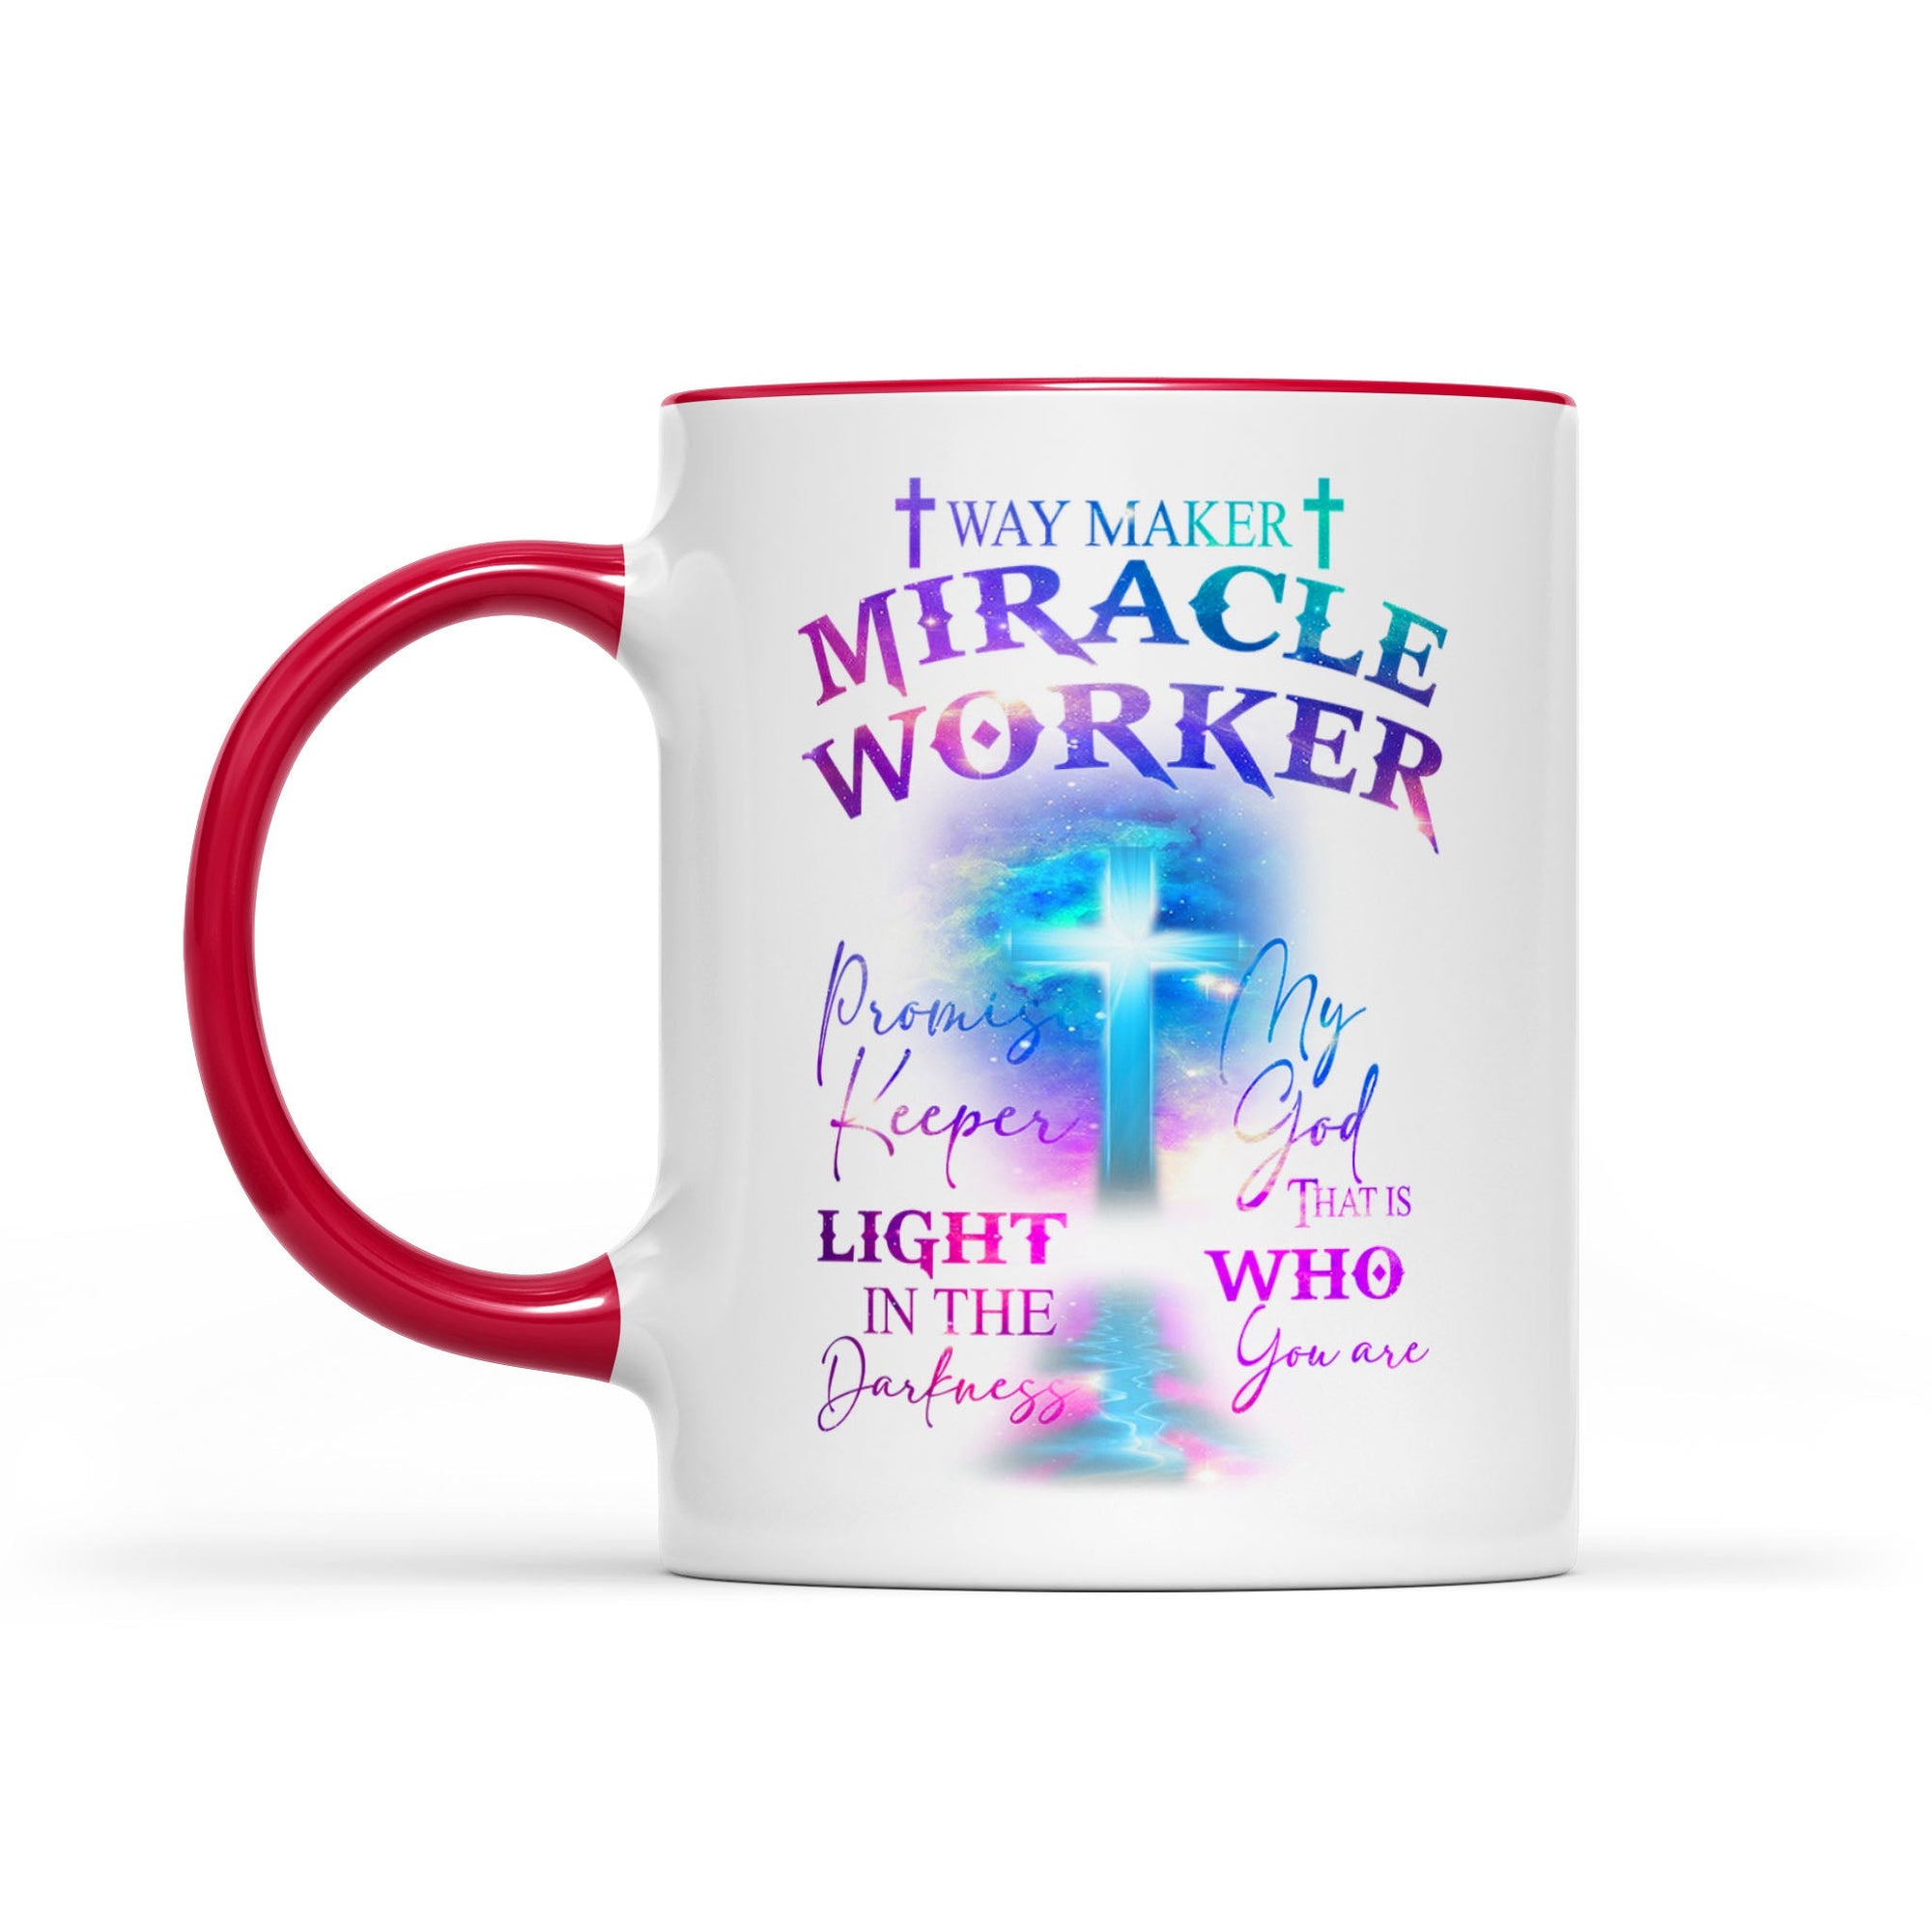 Accent Mug Way Maker Miracle Worker Promise Keeper Light In The Darkness My God That Is Who You Are